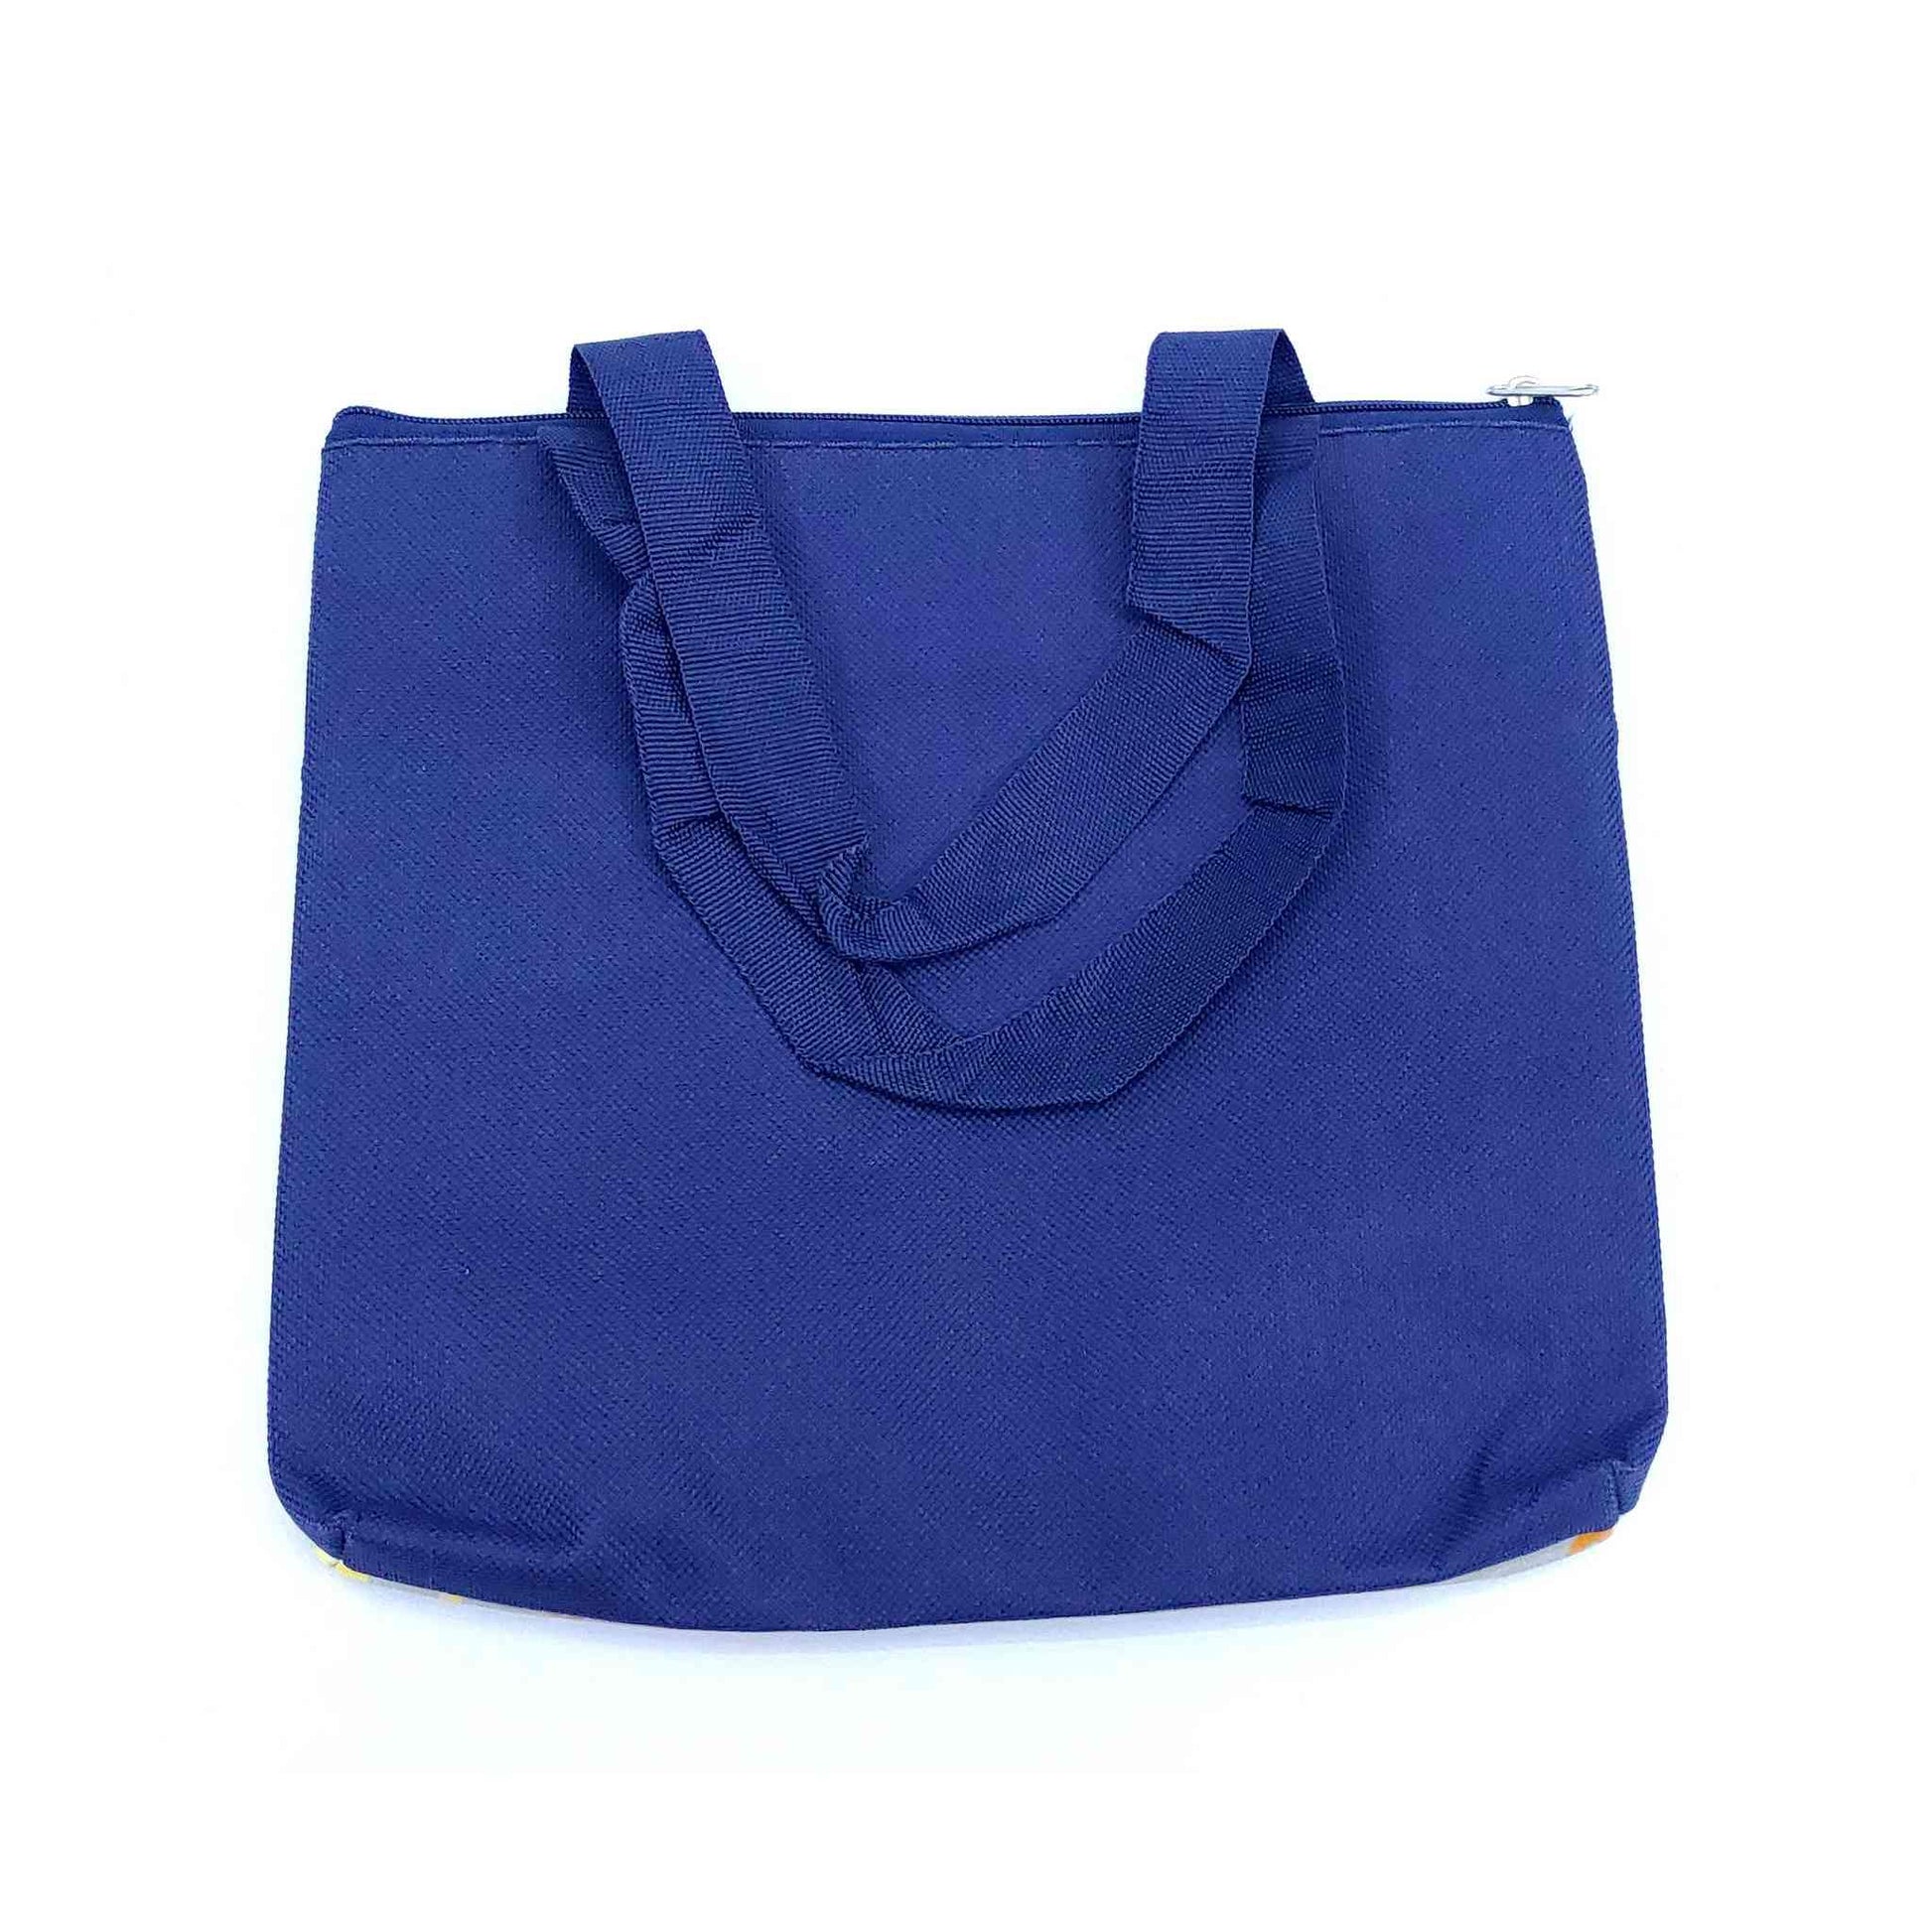 Imported Durable Canvas Printed multi purpose utility Medium size Bag with handles for all occasions for the girls and ladies, Design 5, Dark Blue - Indian Petals